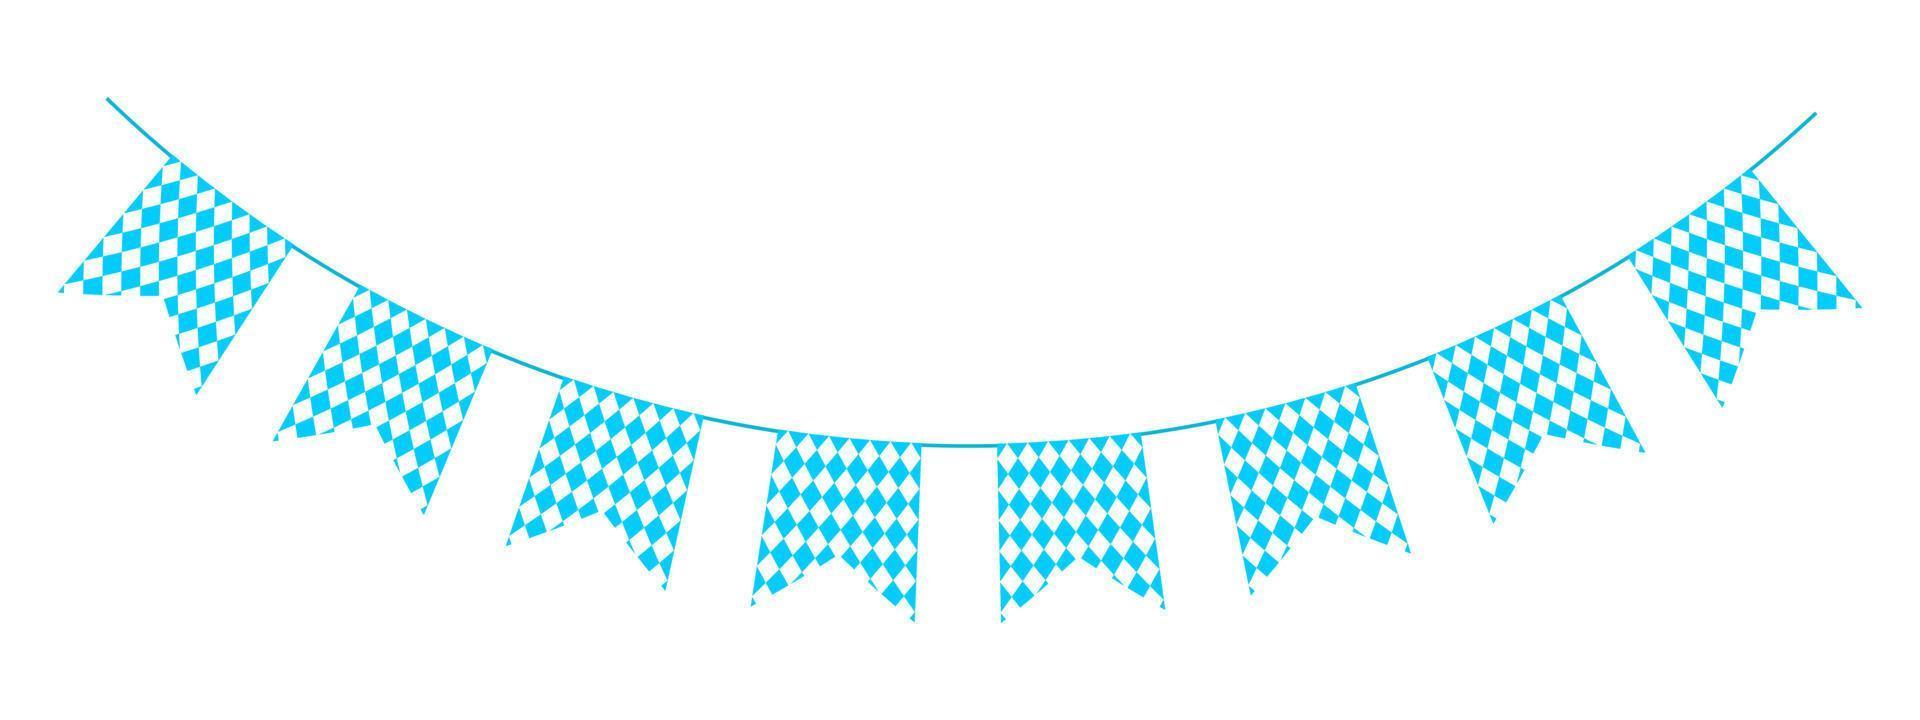 Oktoberfest garland with flags in Bavarian colors. Bunting for traditional German beer festival with blue and white rhombus pattern. Decoration for banner, card, poster vector